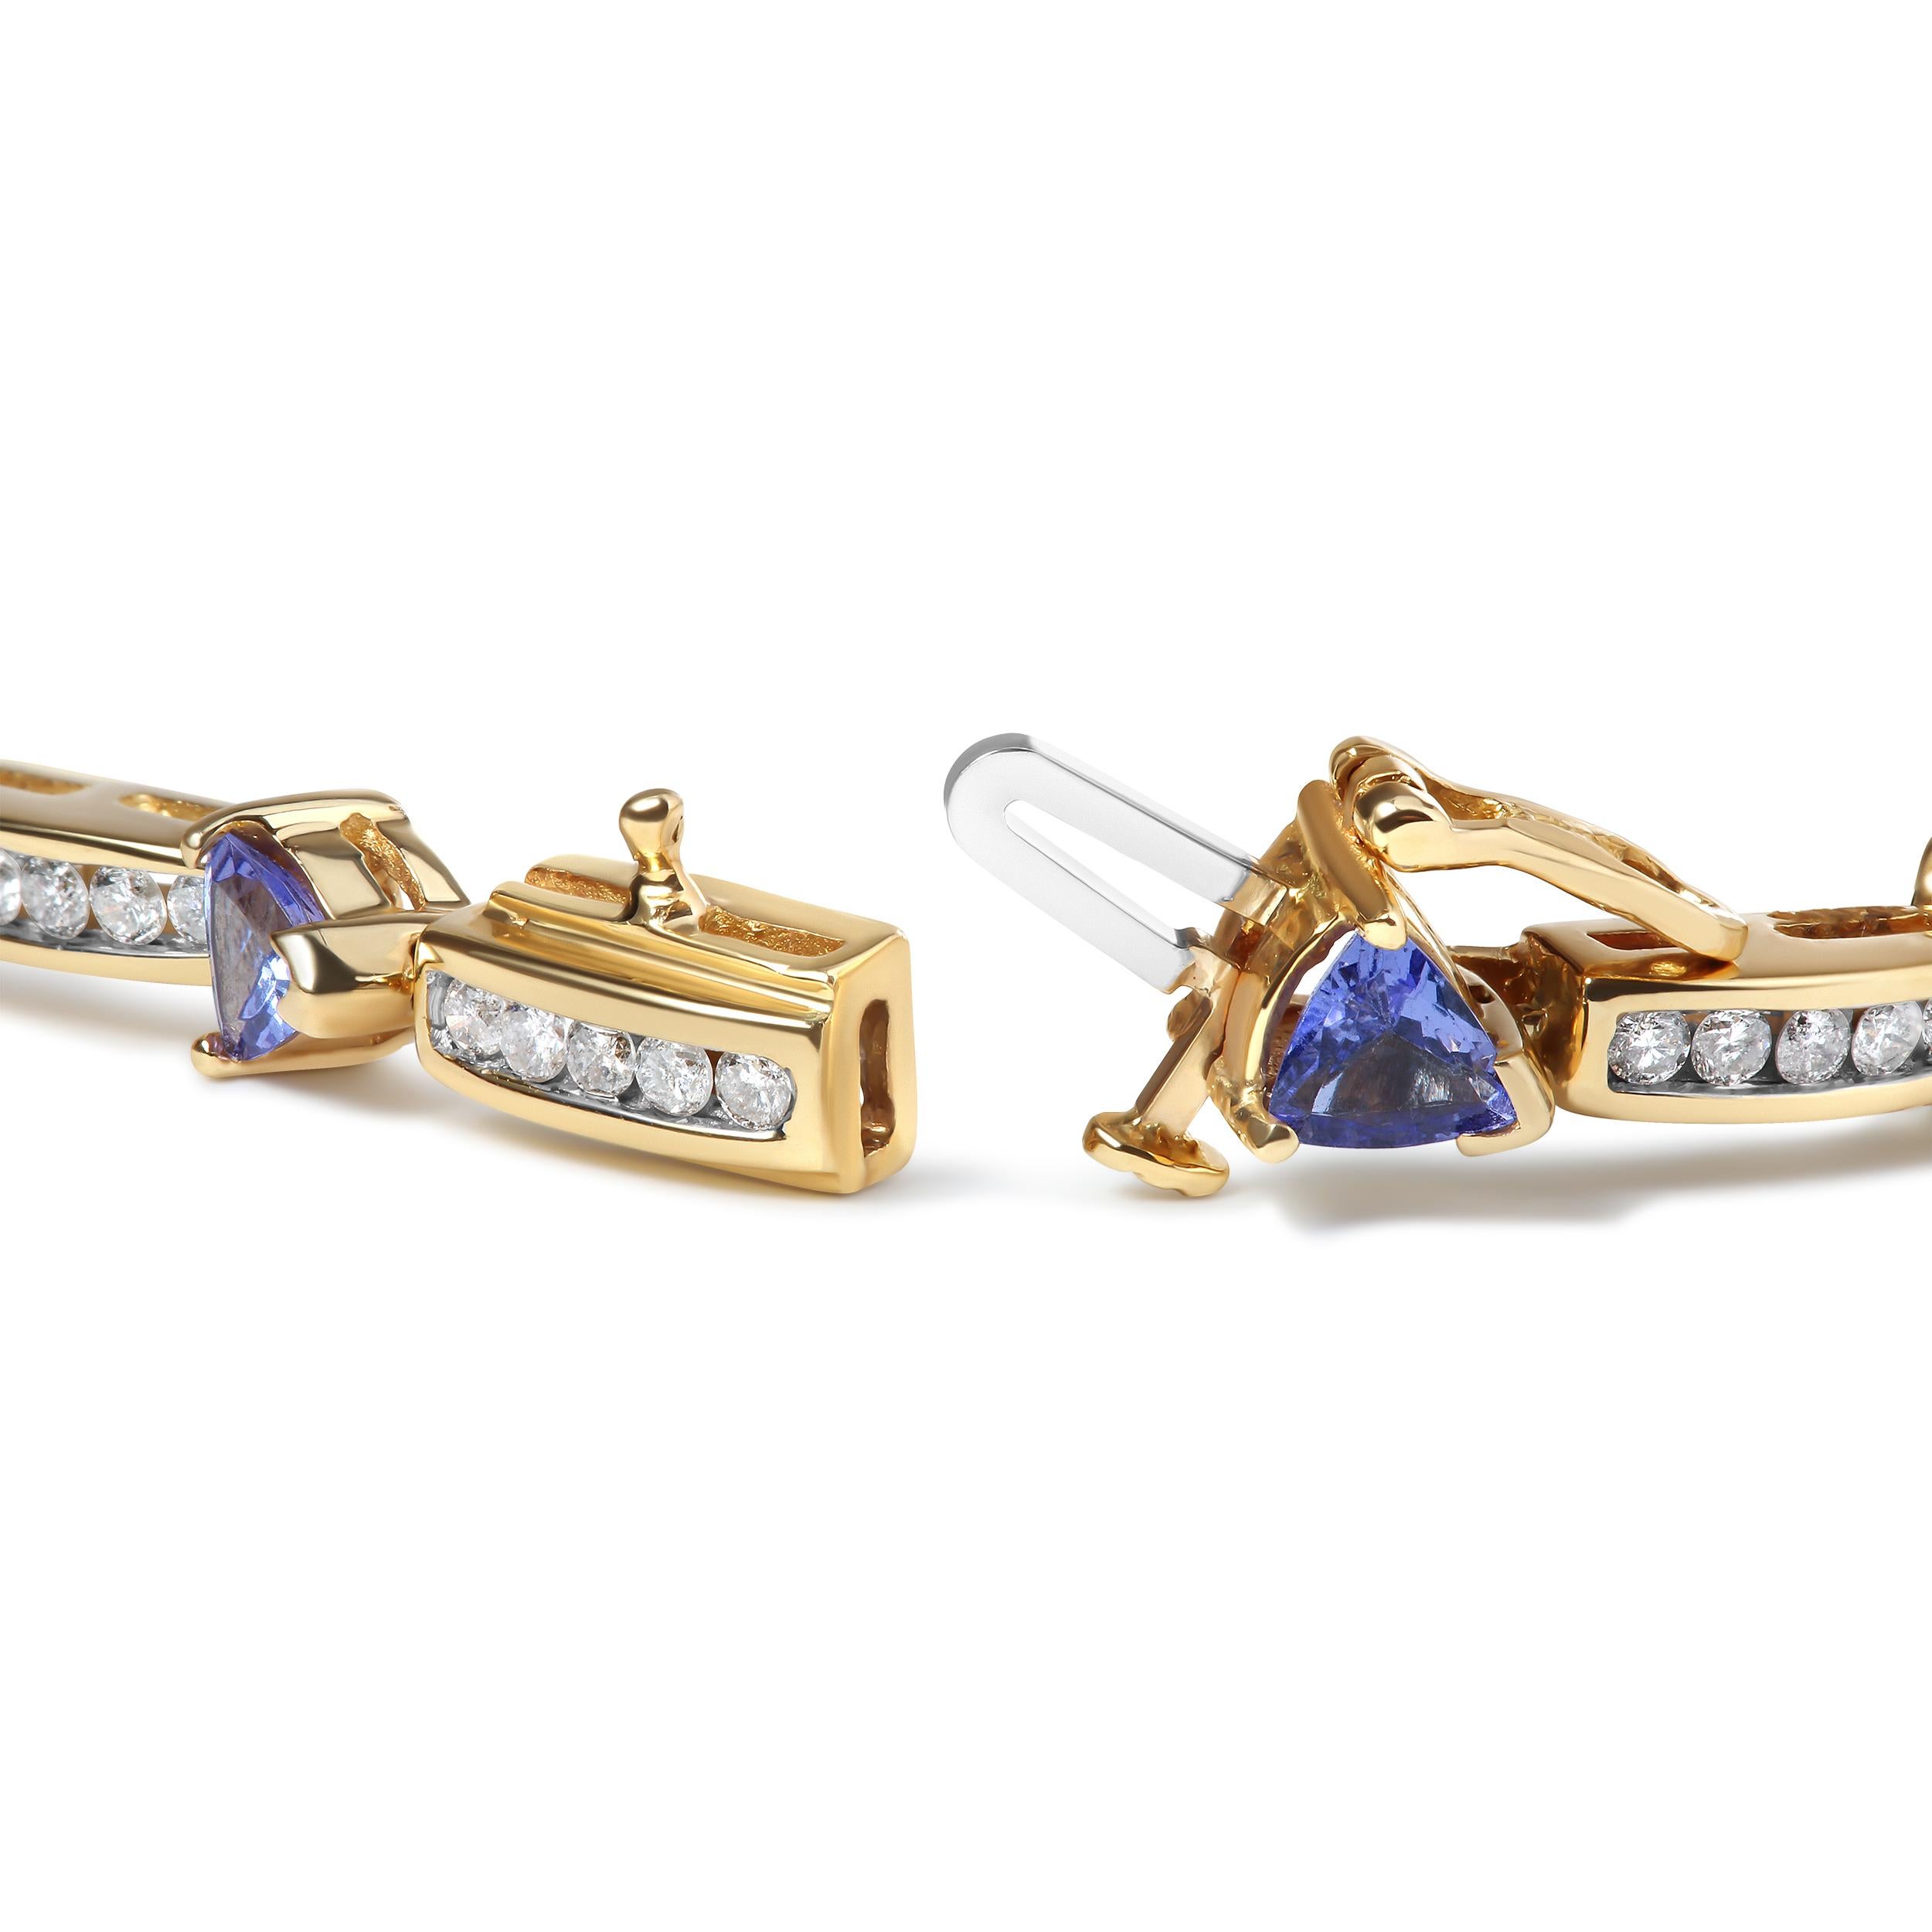 This stunning 14K yellow gold bracelet is the perfect addition to your jewelry collection. It features 12 gorgeous trillion cut blue tanzanite stones, each measuring 5 MM, that are the birthstone for December. These natural stones have been treated